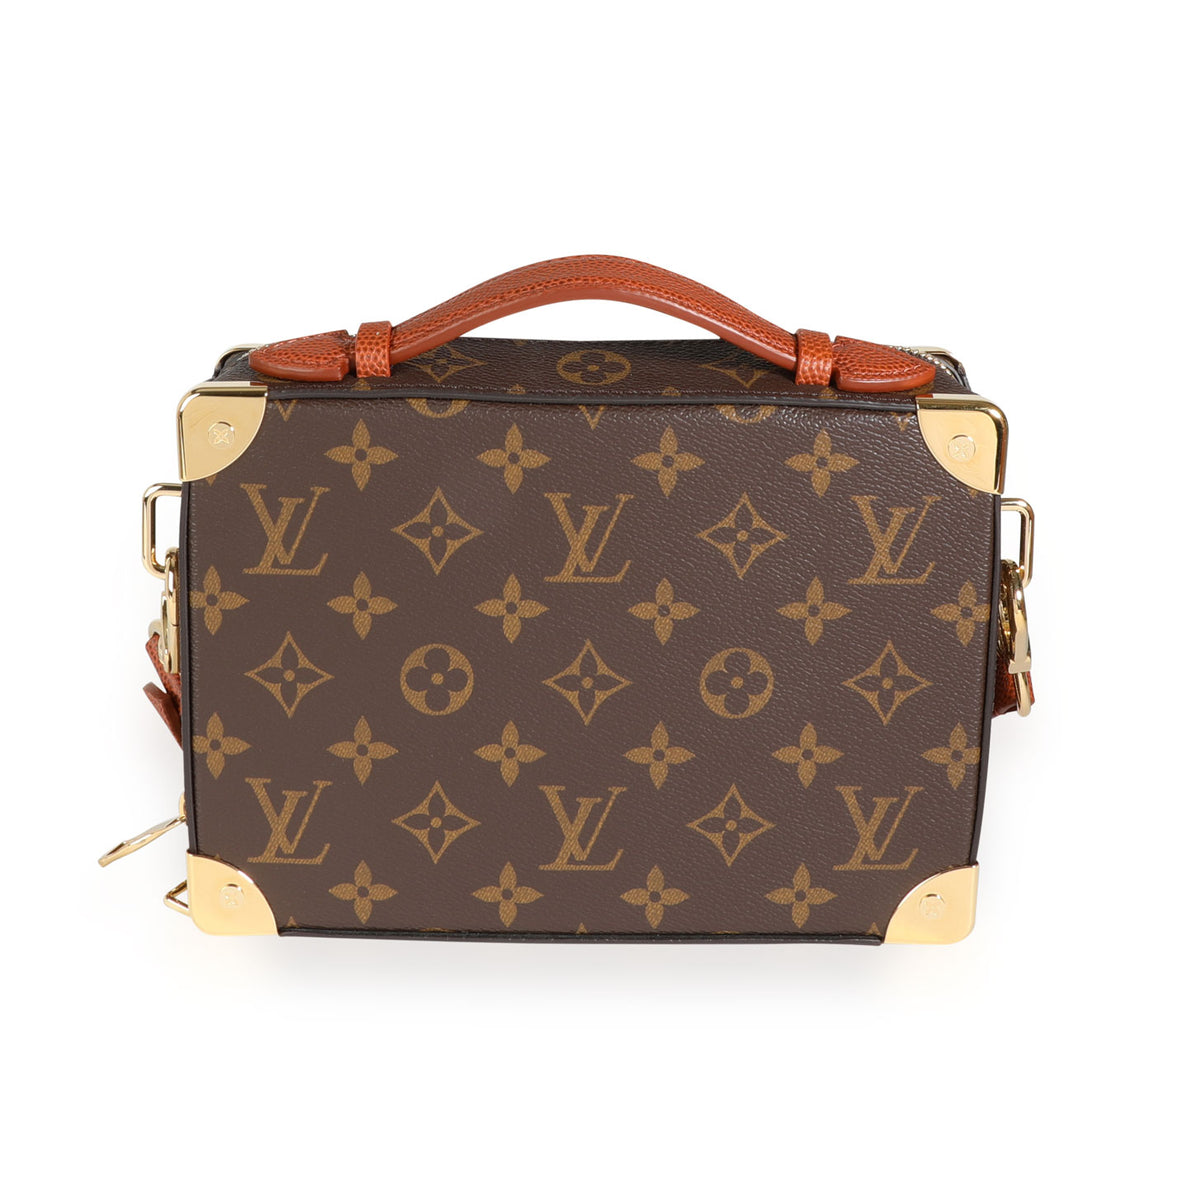 LIMITED EDITION] NEWEST LV X NBA Louis Vuitton Hand Trunk